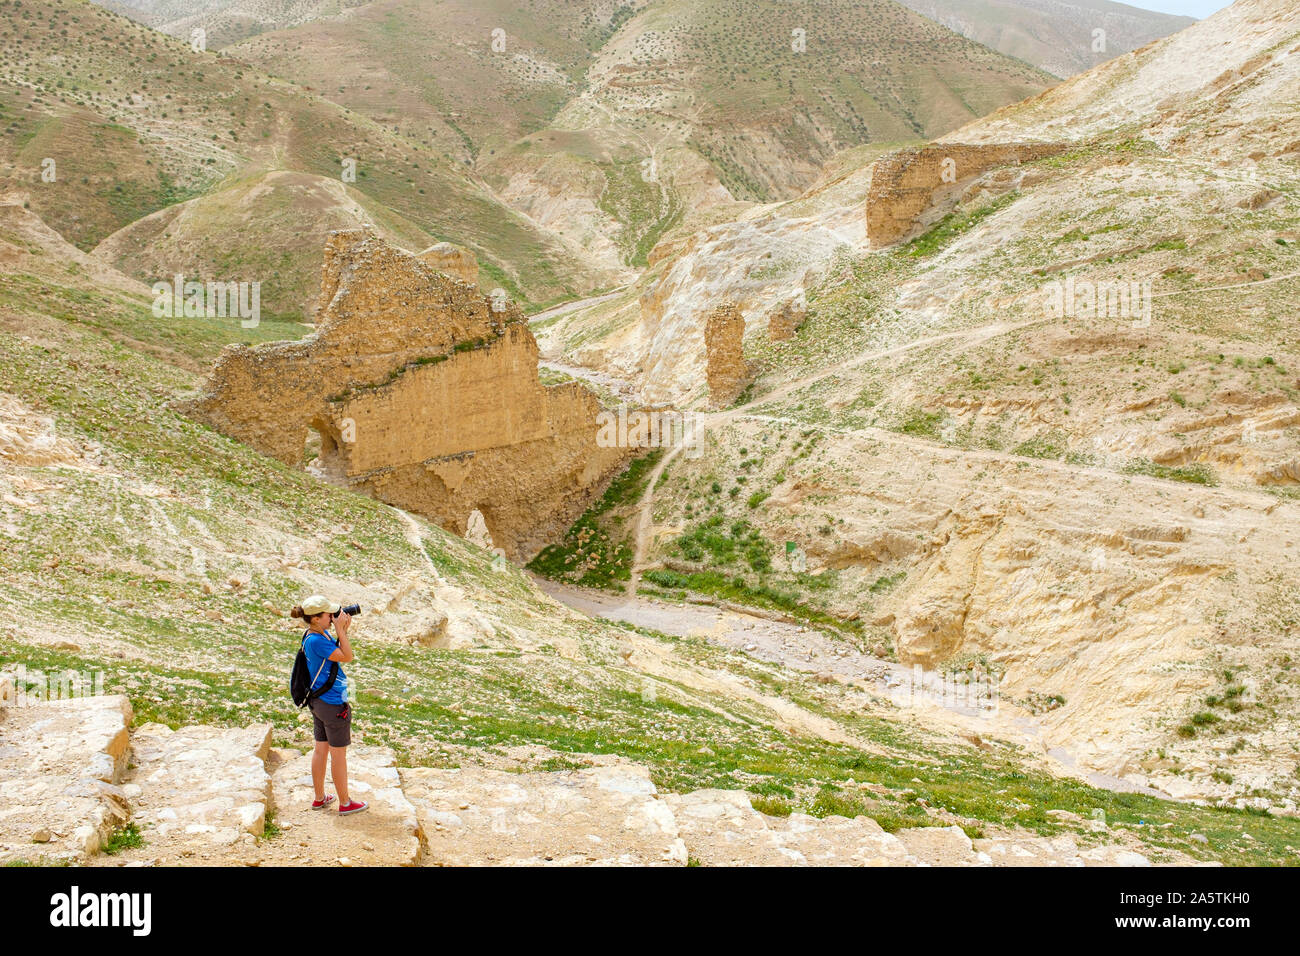 Hikers pass in front of Ruins of ancient aqueduct in Wadi Quelt, Prat River Gorge, Jericho Governorate, West Bank, Palestine. Stock Photo